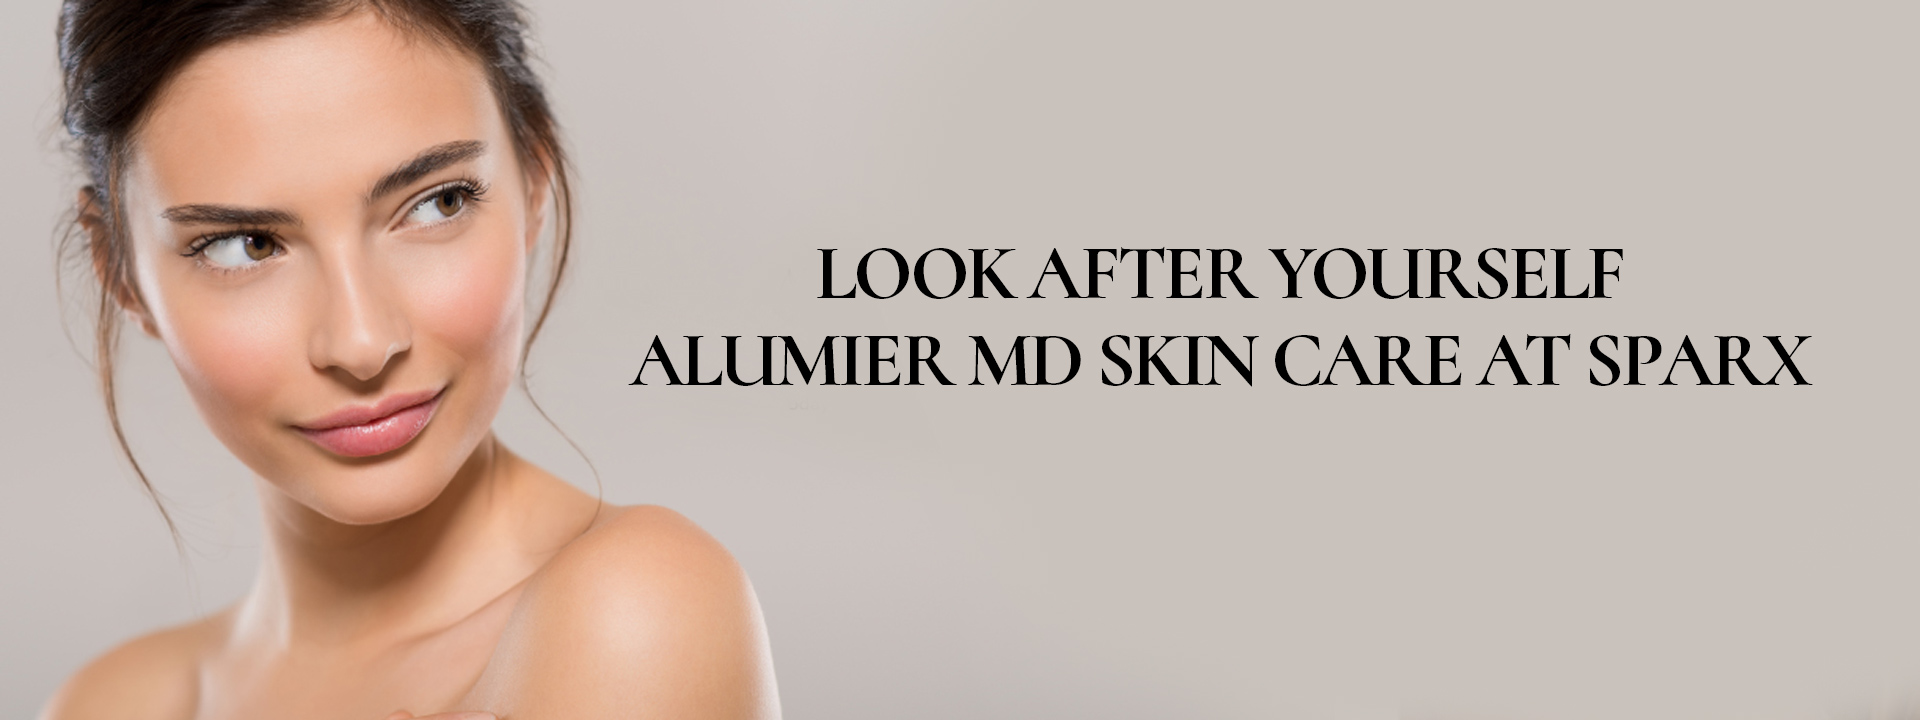 AlumierMD Medical Skin Care at Sparx Winchester Beauty Salon